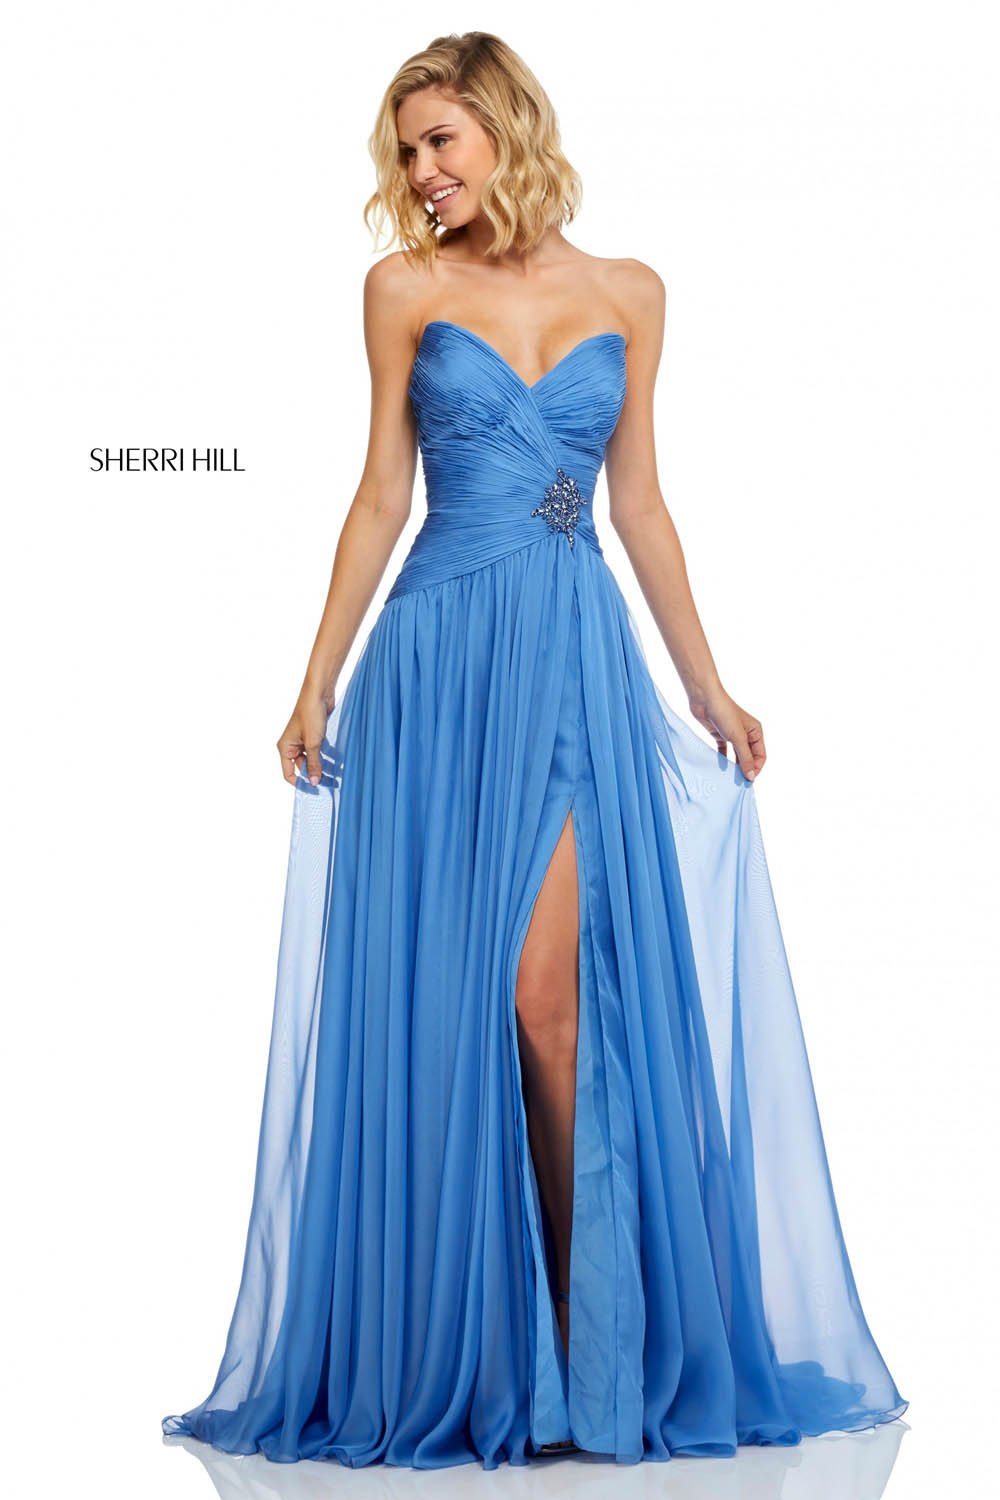 Sherri Hill 52588 dress images in these colors: Black, Periwinkle, Peacock, Jade, Navy, Berry, Bright Pink.